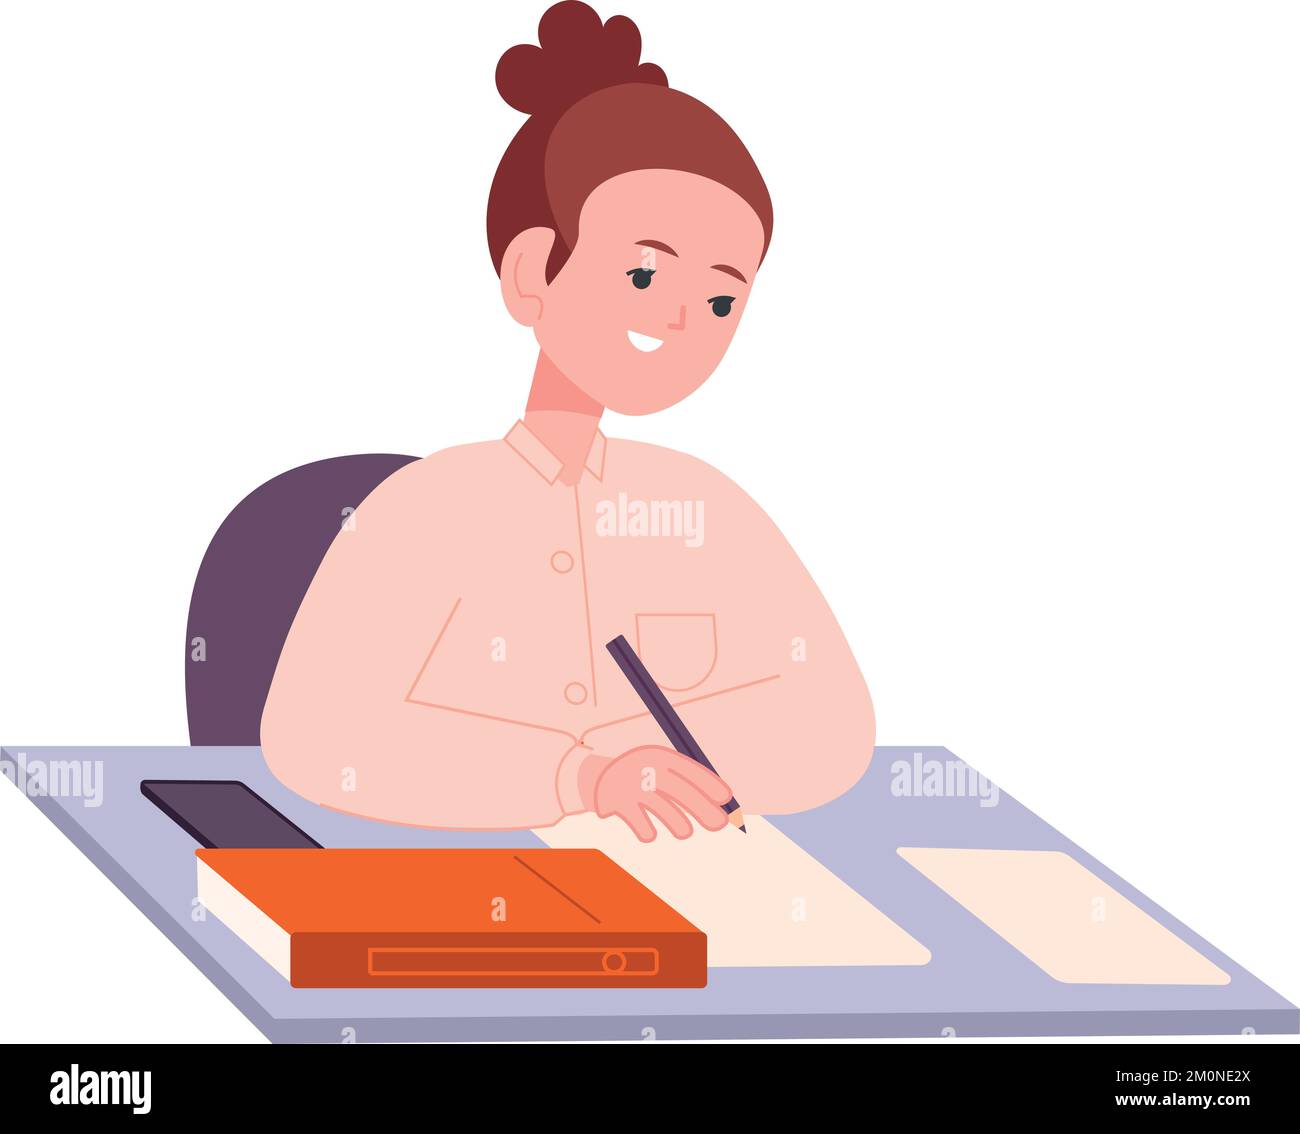 Kid doing homework. School girl studying and writing isolated on white background Stock Vector